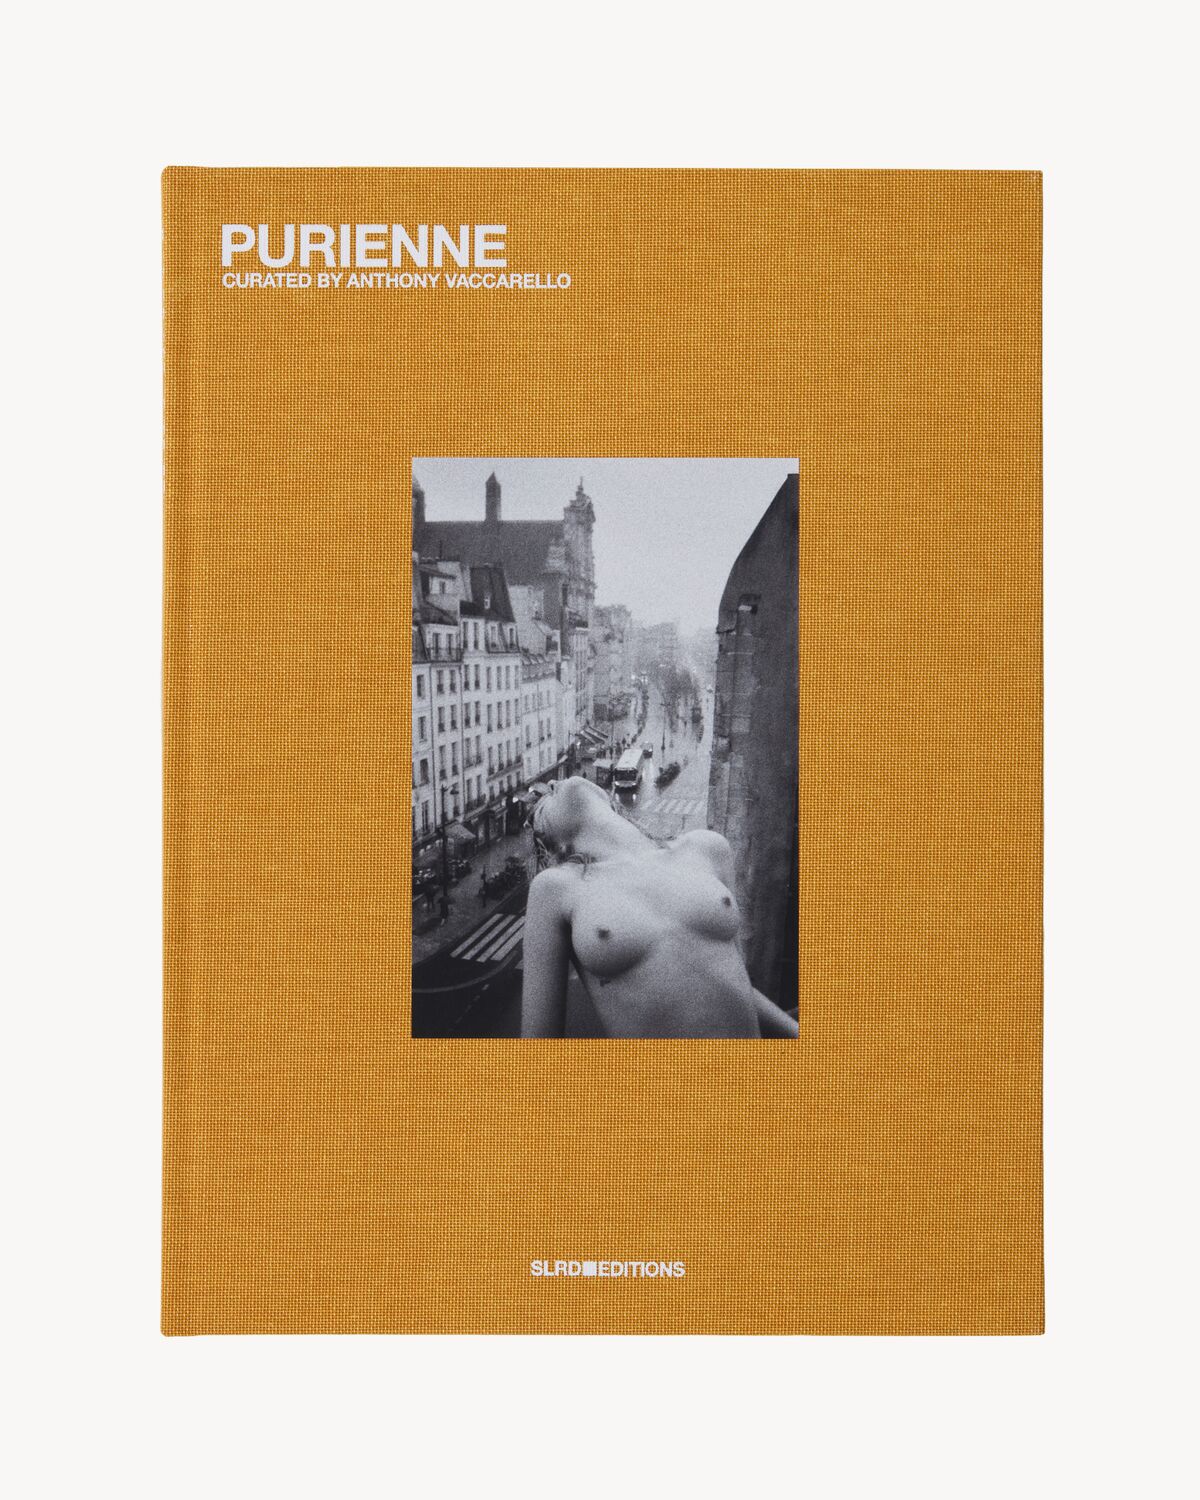 SL EDITIONS: PURIENNE